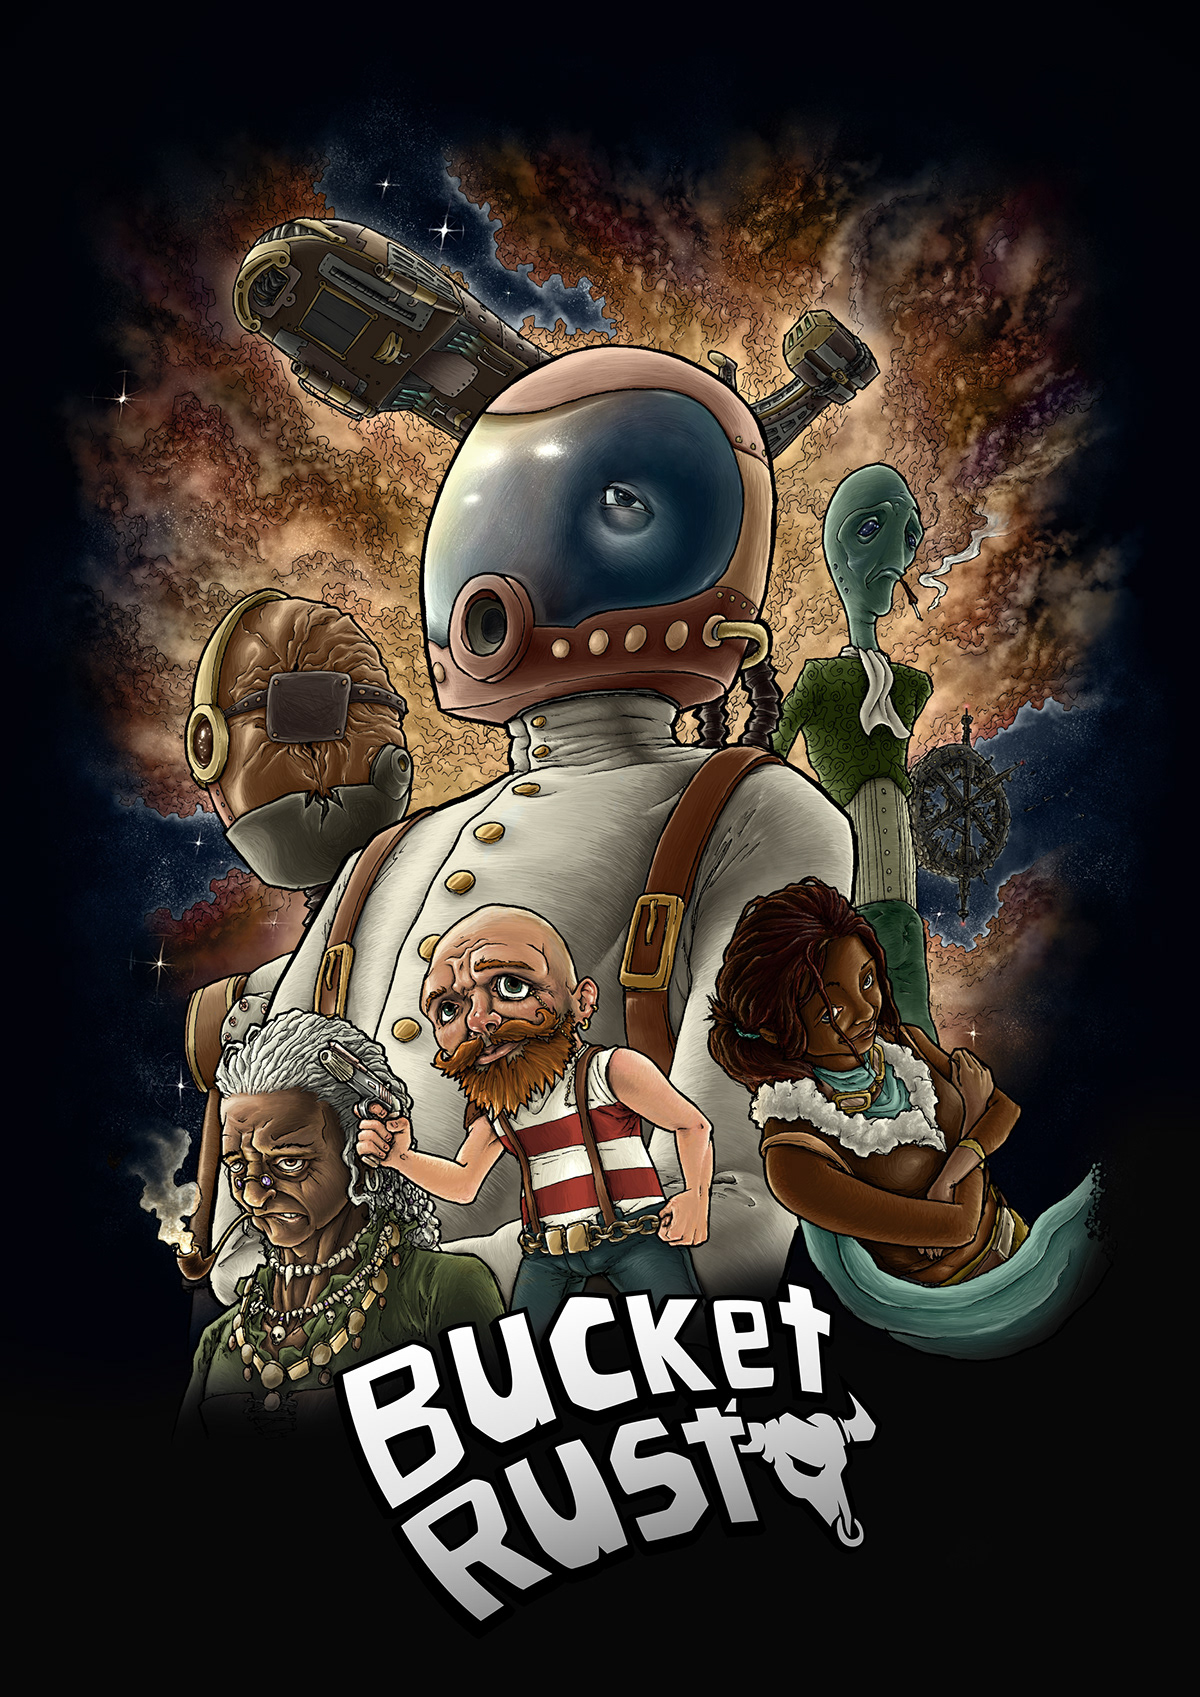 Webcomic bucket rust sci-fi spaceship nebulae space staion robot pirate